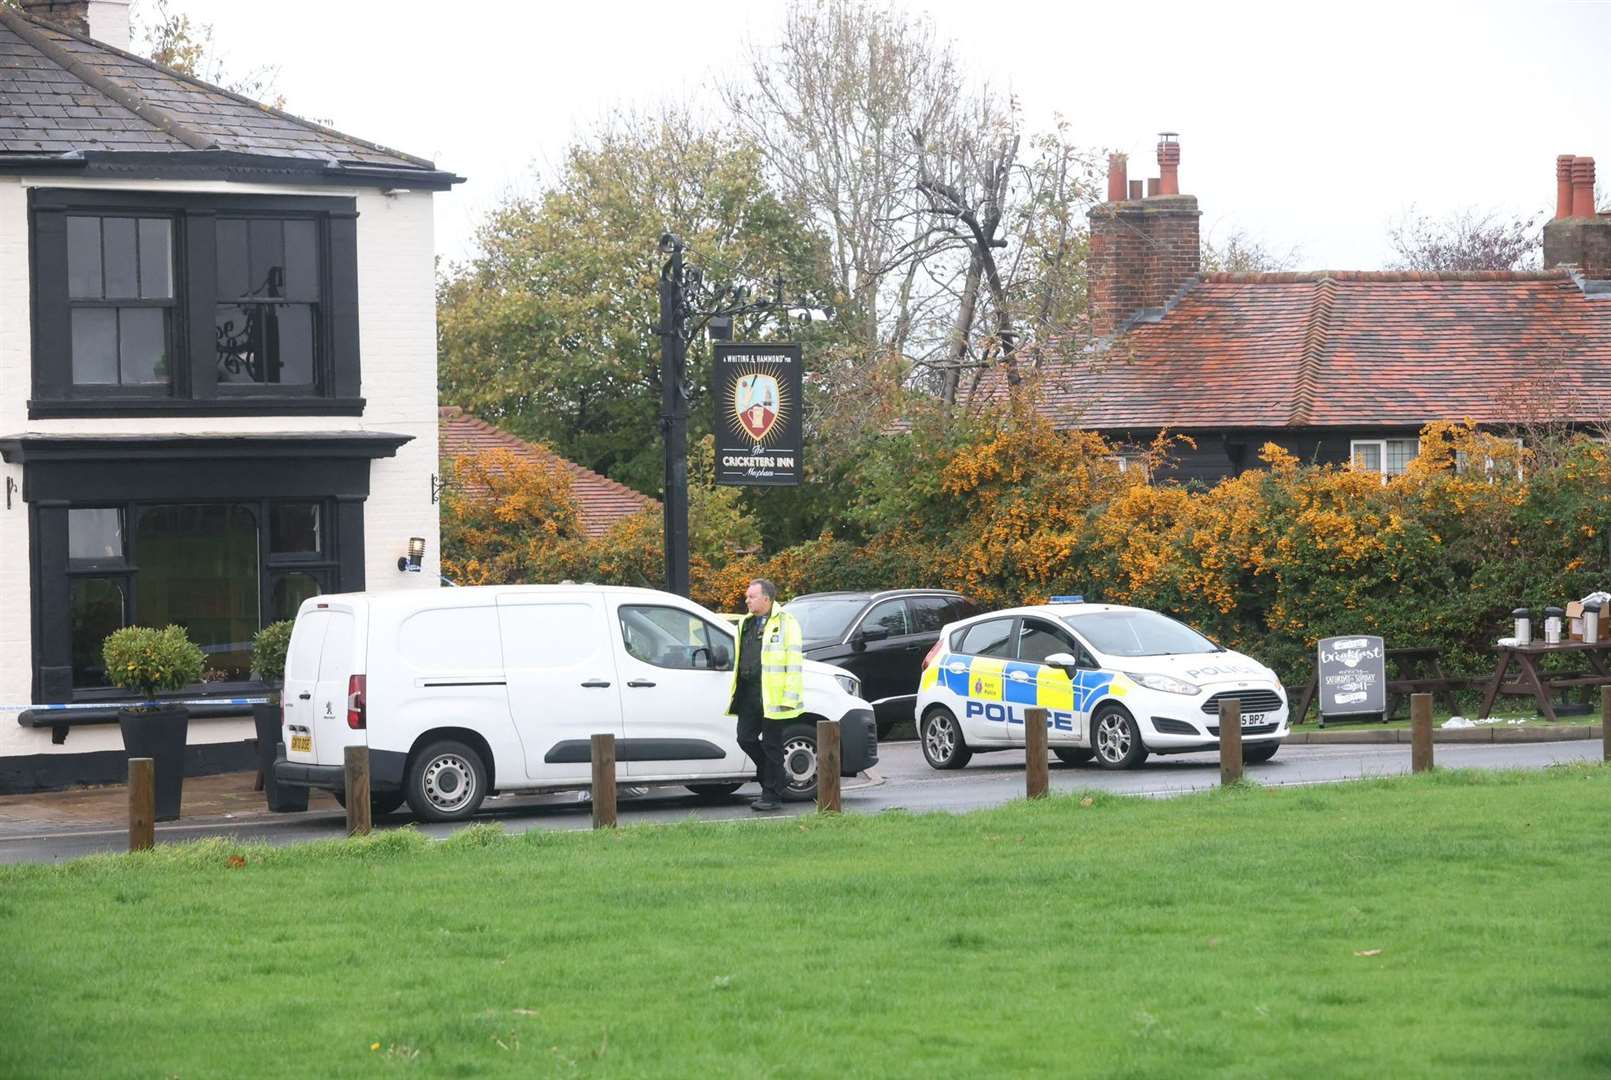 Police at the Cricketers Inn pub after landlord David Brown was allegedly attacked by Batista and his brother-in-law Craig Allen. Picture: UKNIP